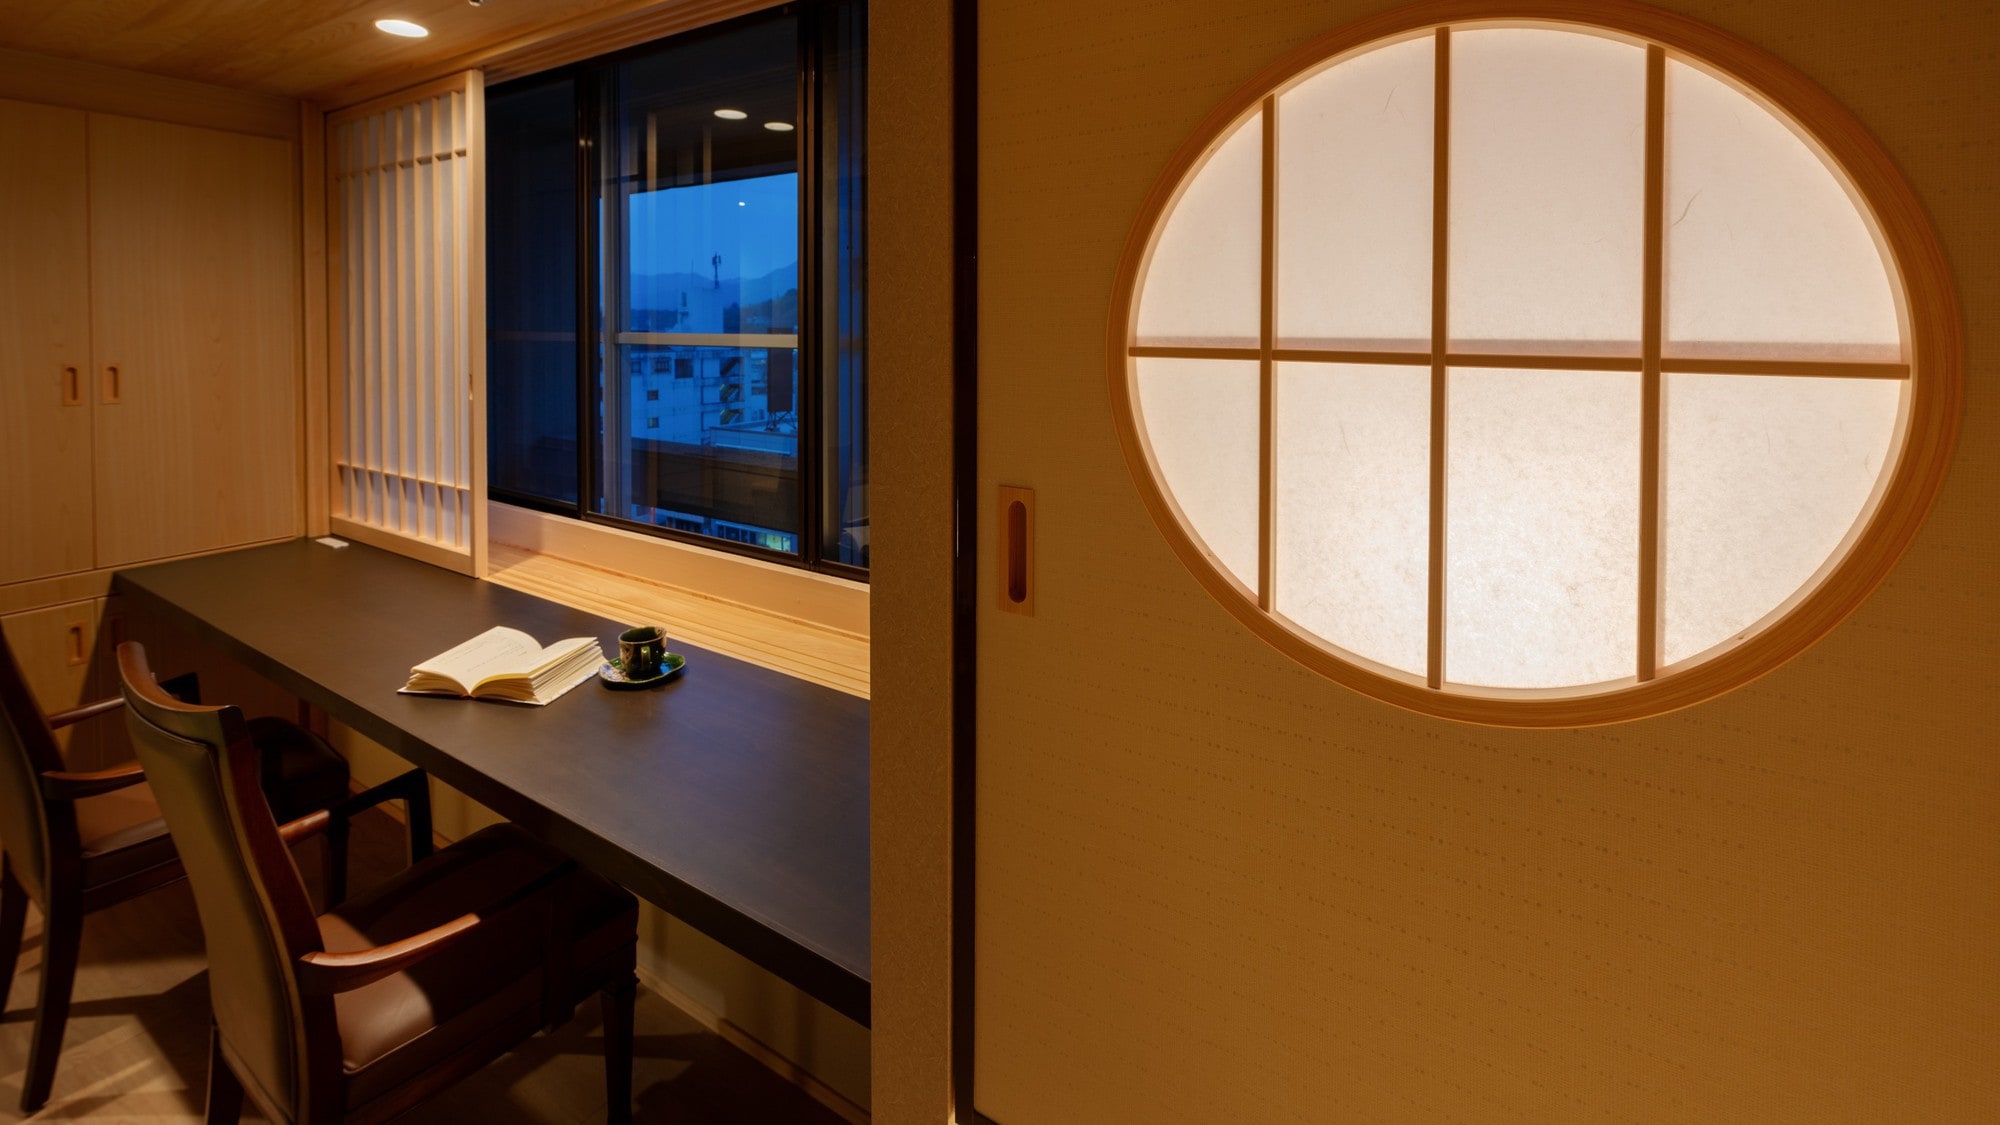 Counter seats by the window facing the train street. Have a relaxing time while looking at Kochi Castle